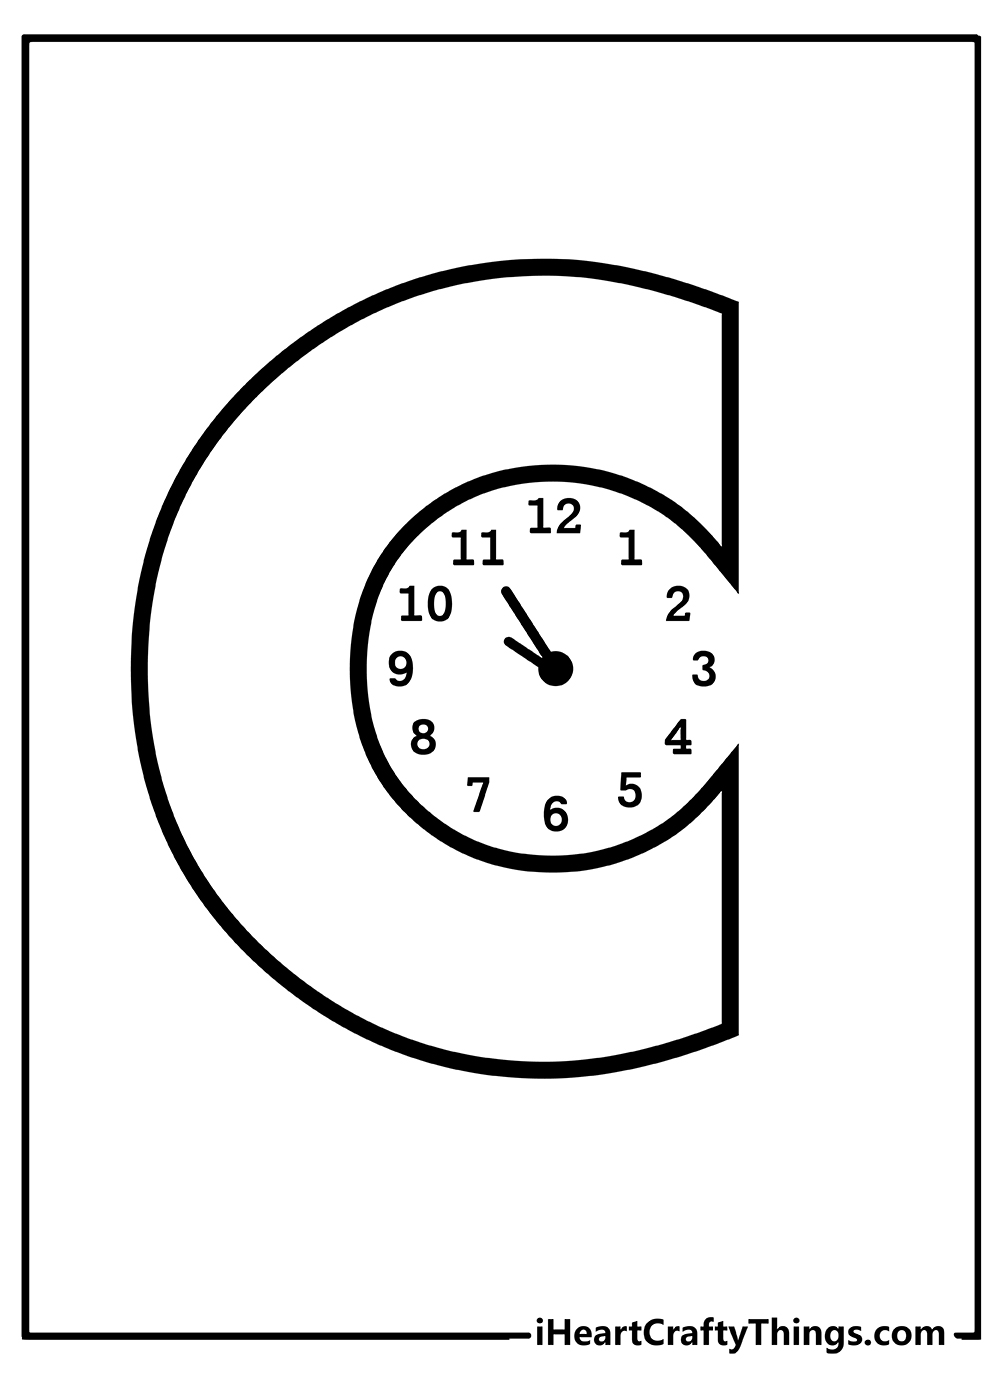 Letter C Coloring Book free printable